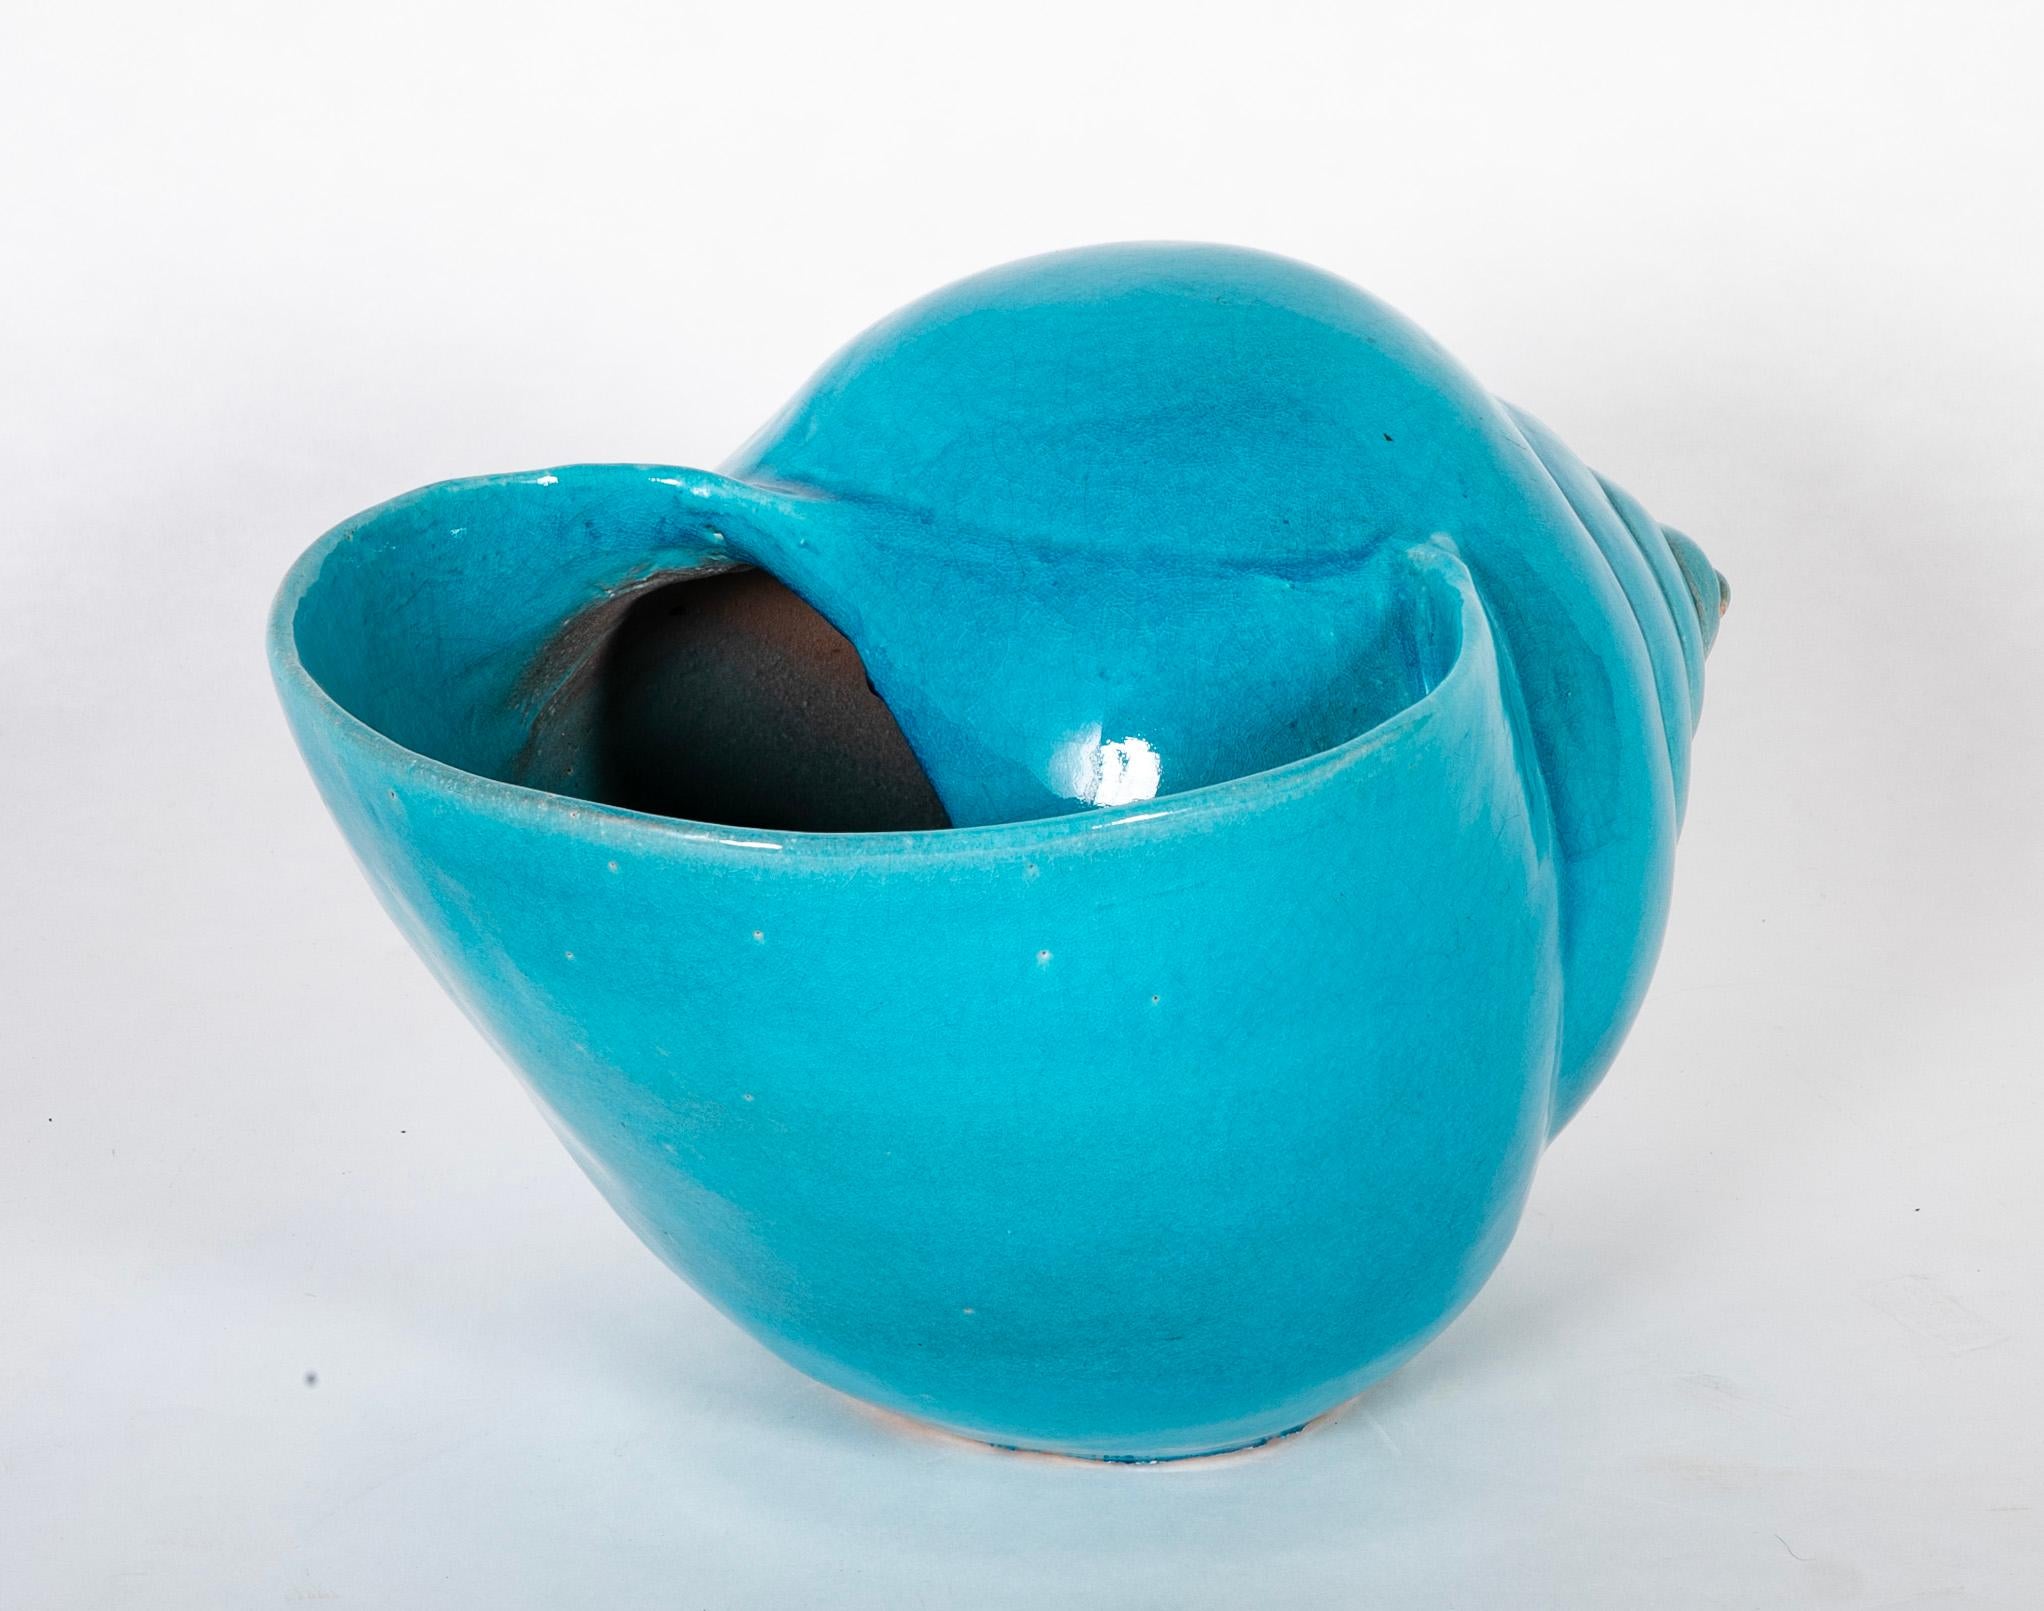 Turquoise Blue Glazed Sea Shell Vase Jardiniere Planter, Large Scale For Sale 12